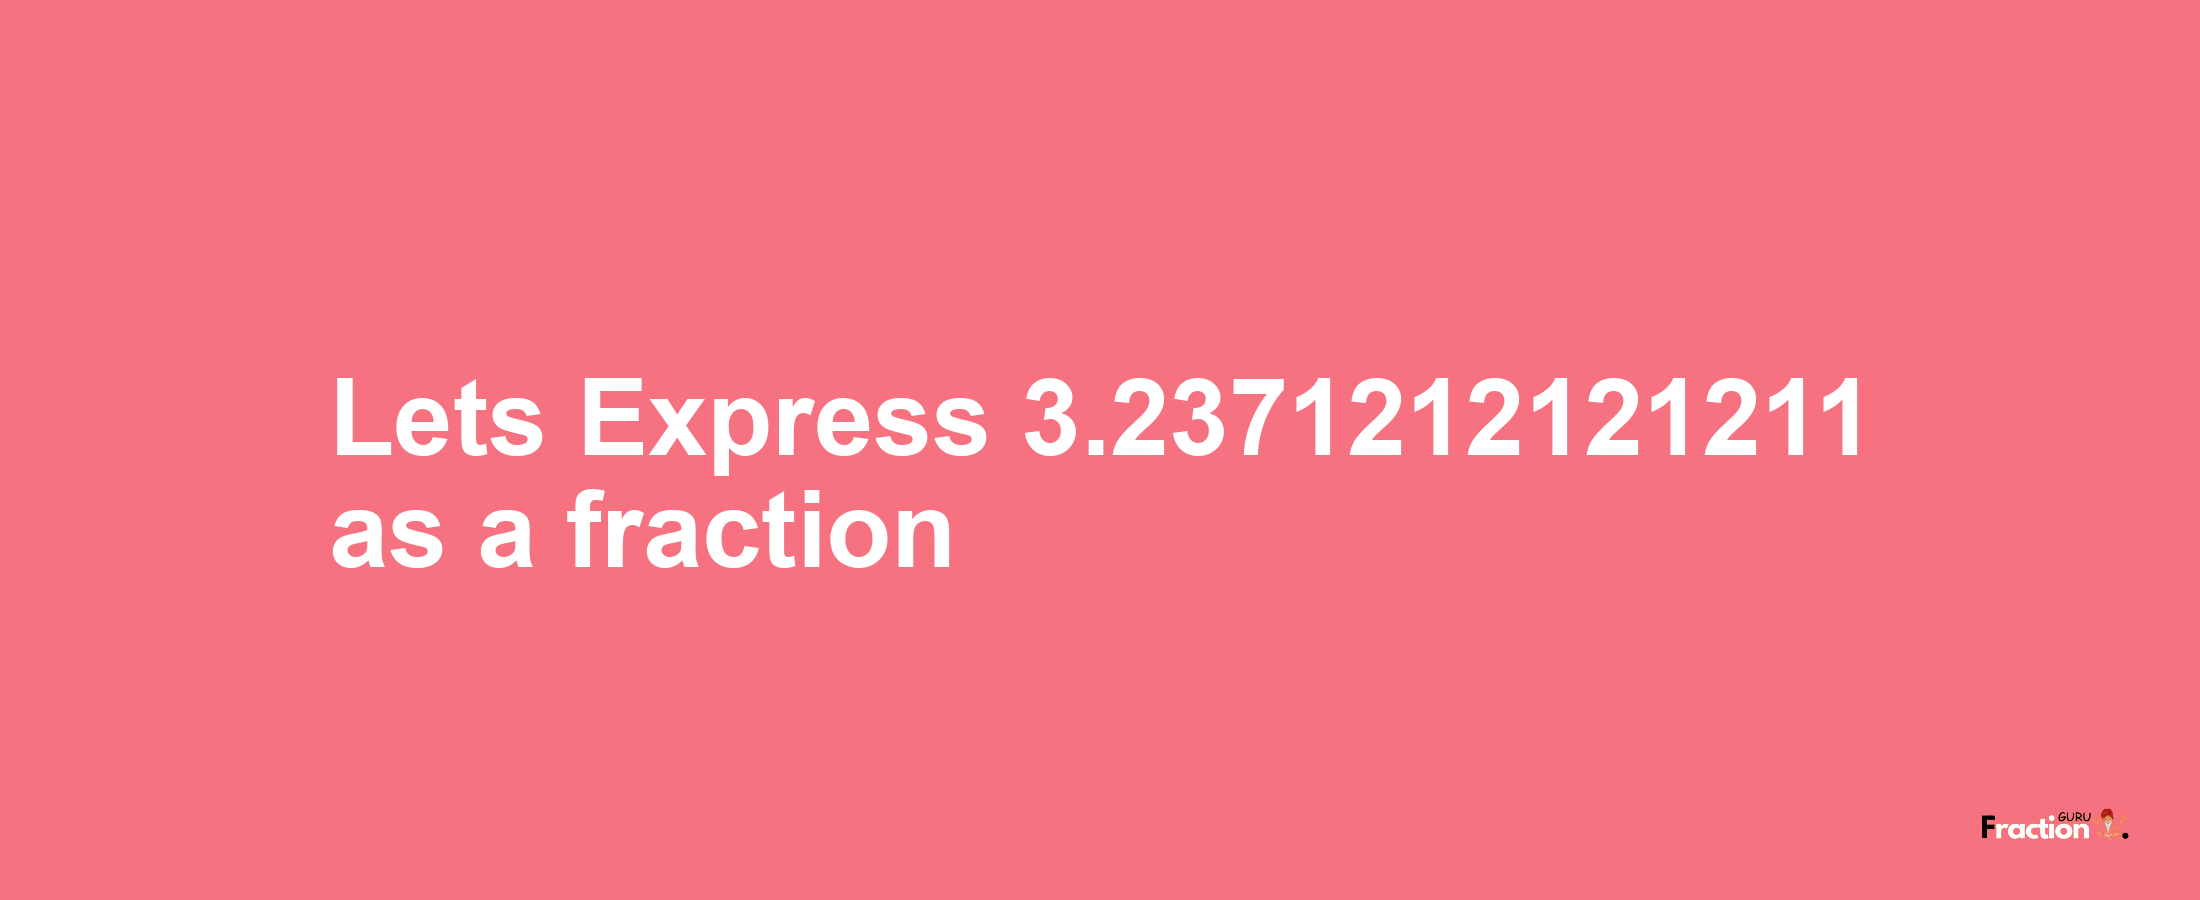 Lets Express 3.2371212121211 as afraction